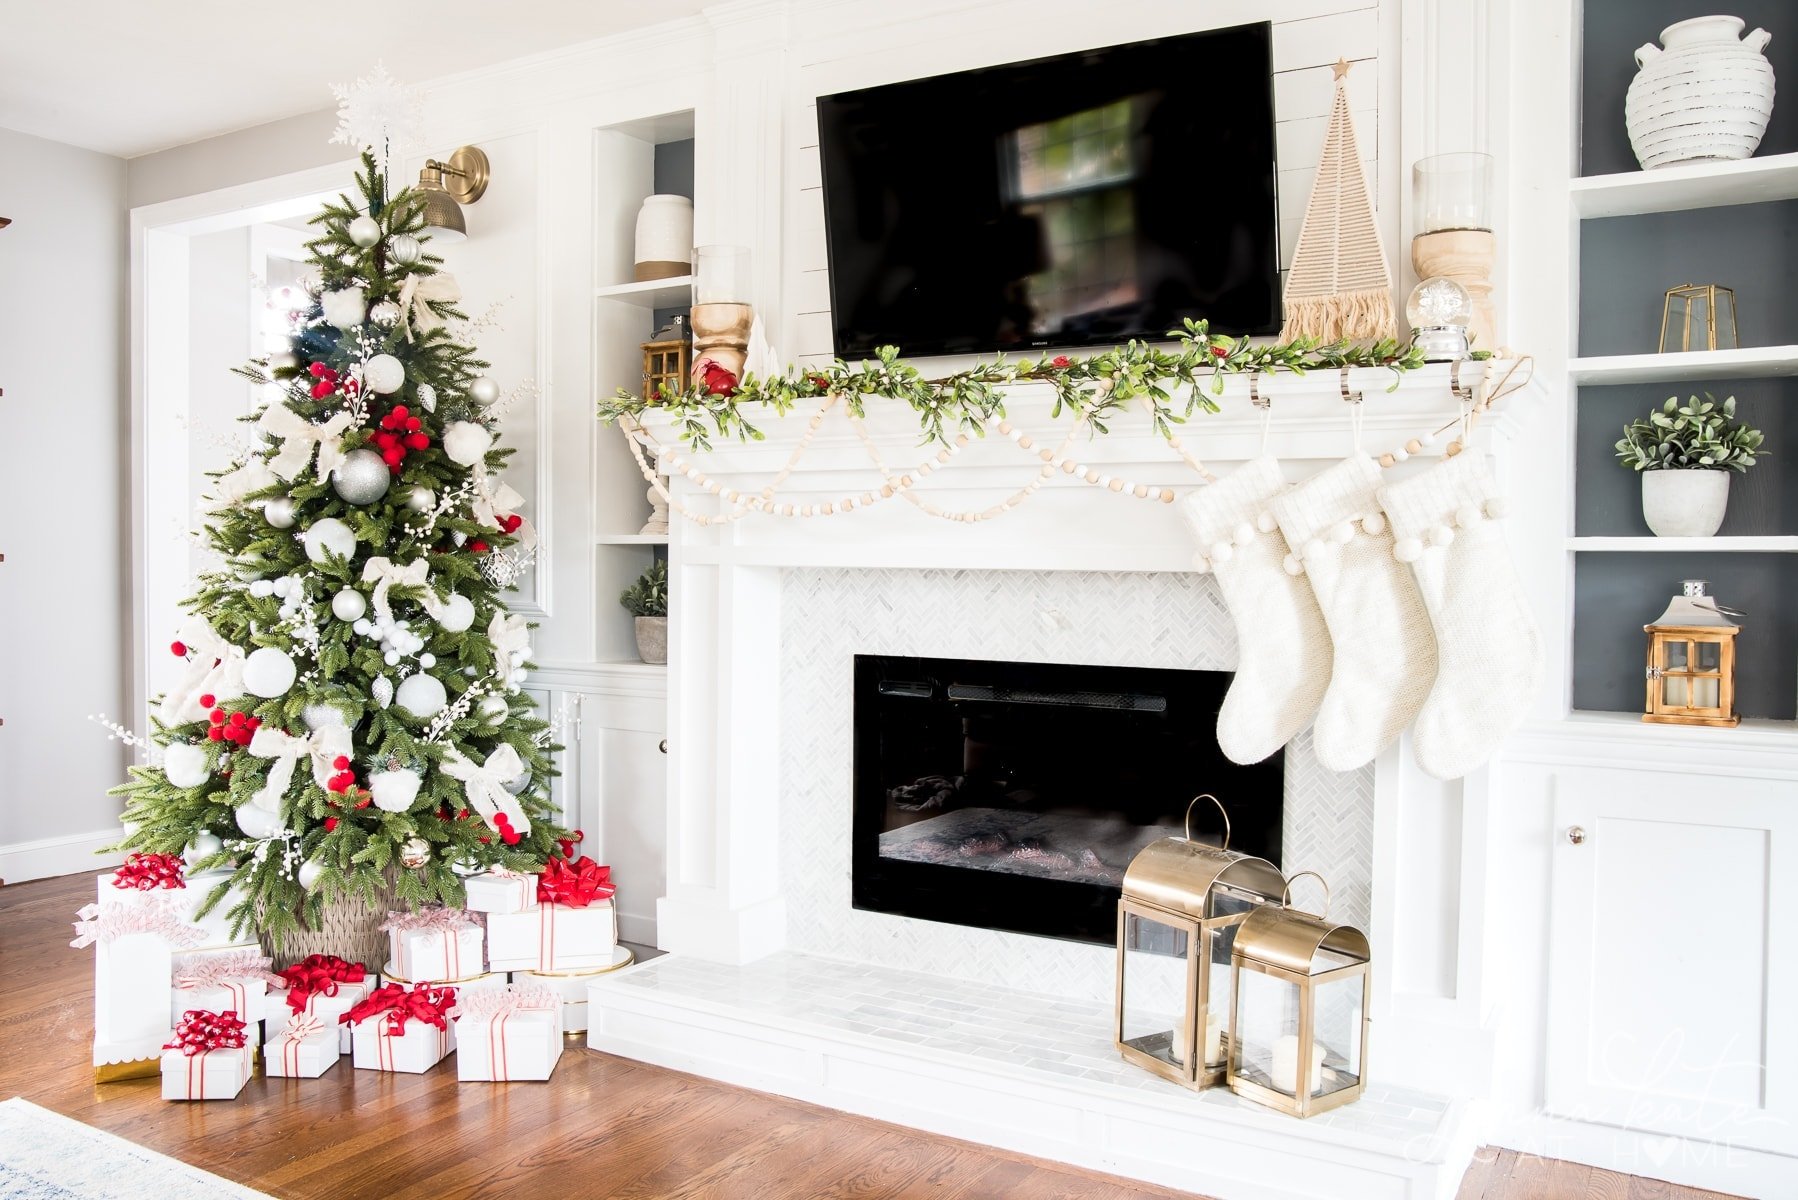 Shah Expertise cinema Christmas Ideas: Decorating a Mantel with A TV Above - Jenna Kate at Home